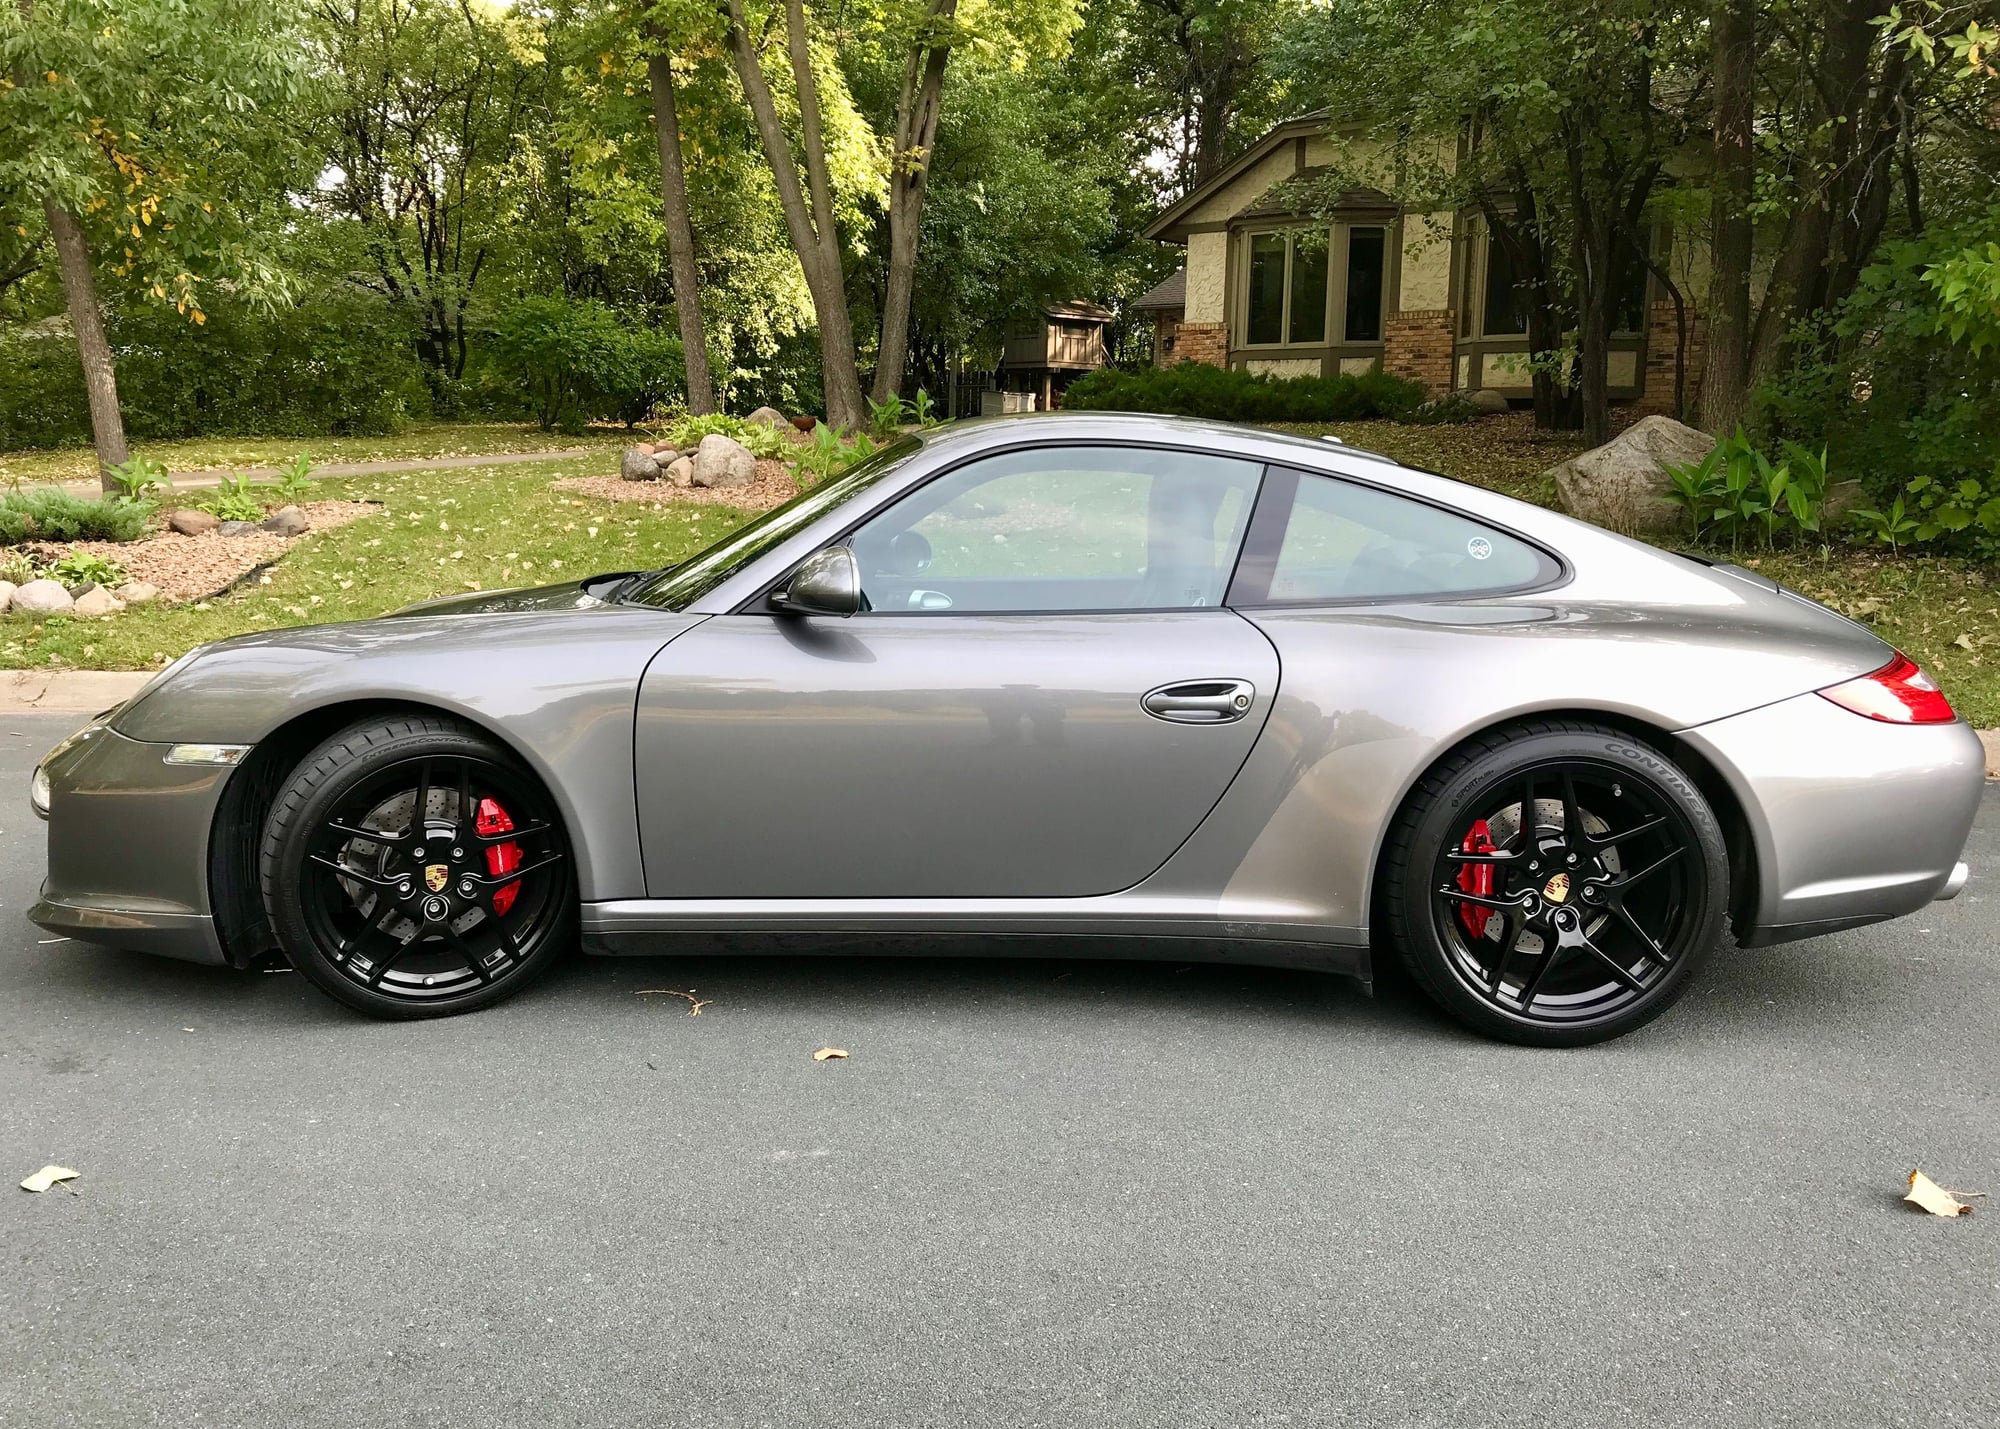 2009 Porsche 911 - 2009 Porsche 911 C4S - Used - VIN WP0AB29969S720397 - 75,000 Miles - 6 cyl - AWD - Automatic - Coupe - Gray - Bloomington, MN 55438, United States